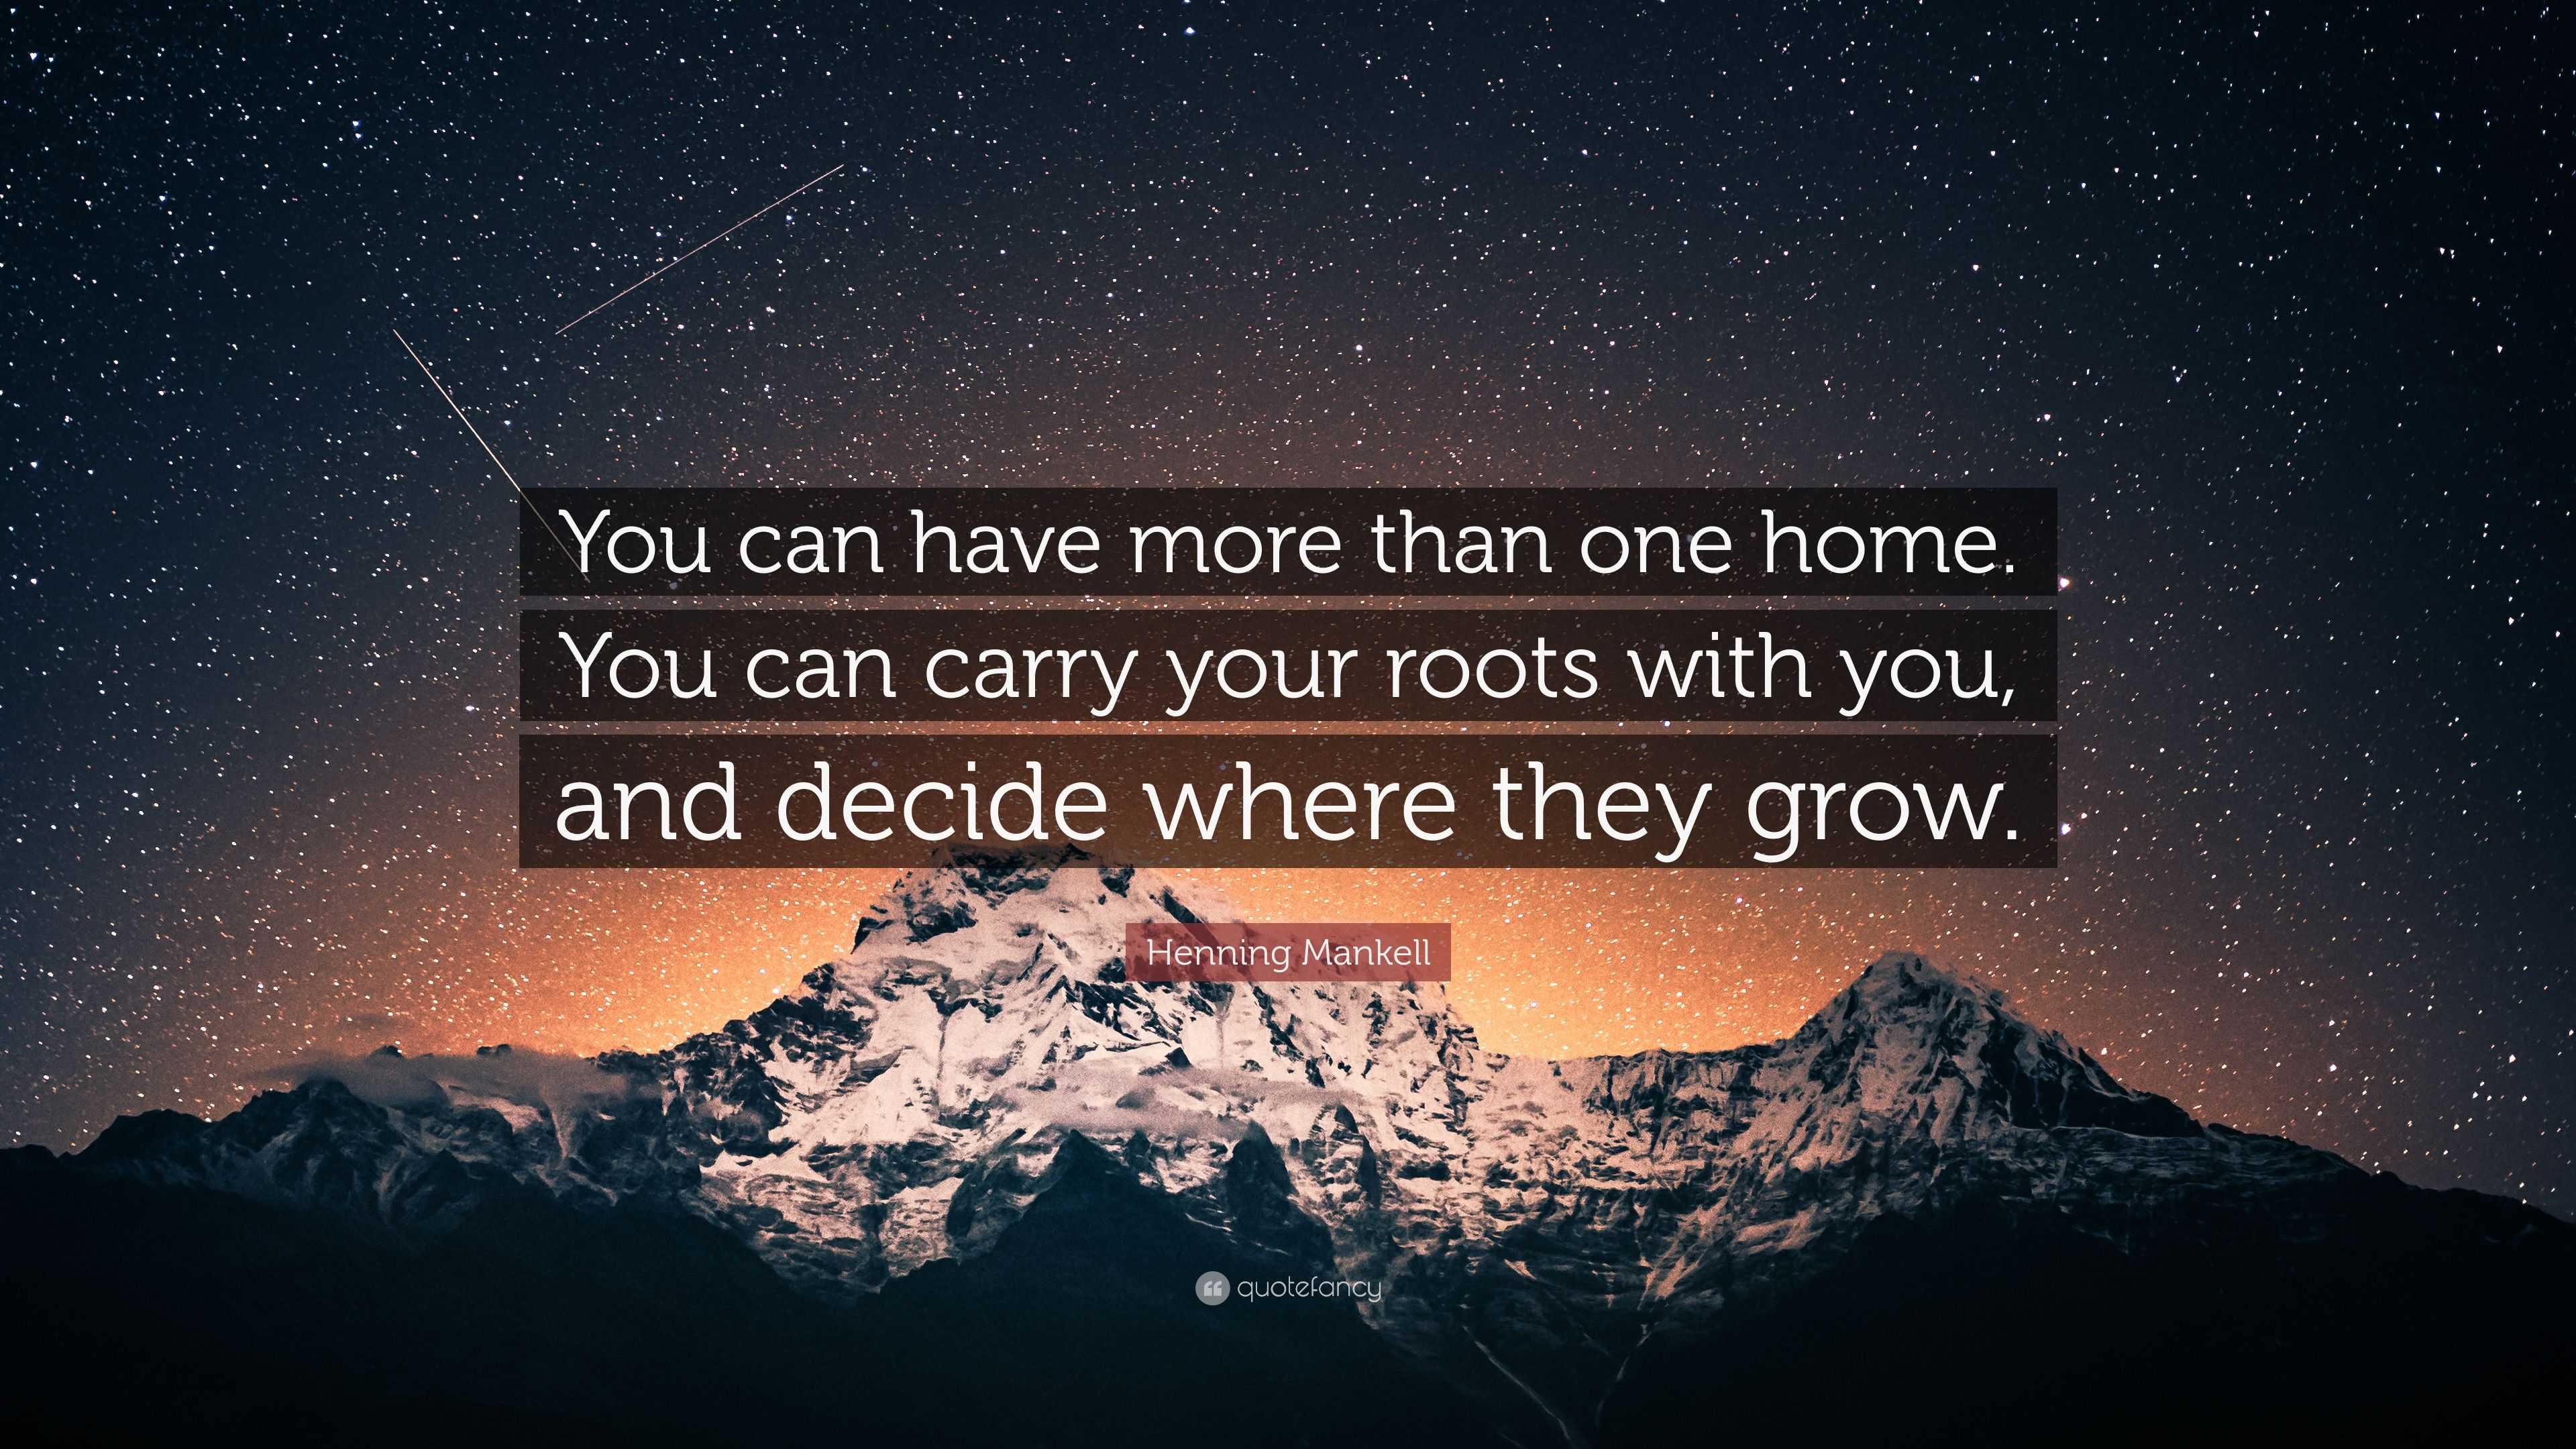 Henning Mankell Quote “You can have more than one home. You can carry